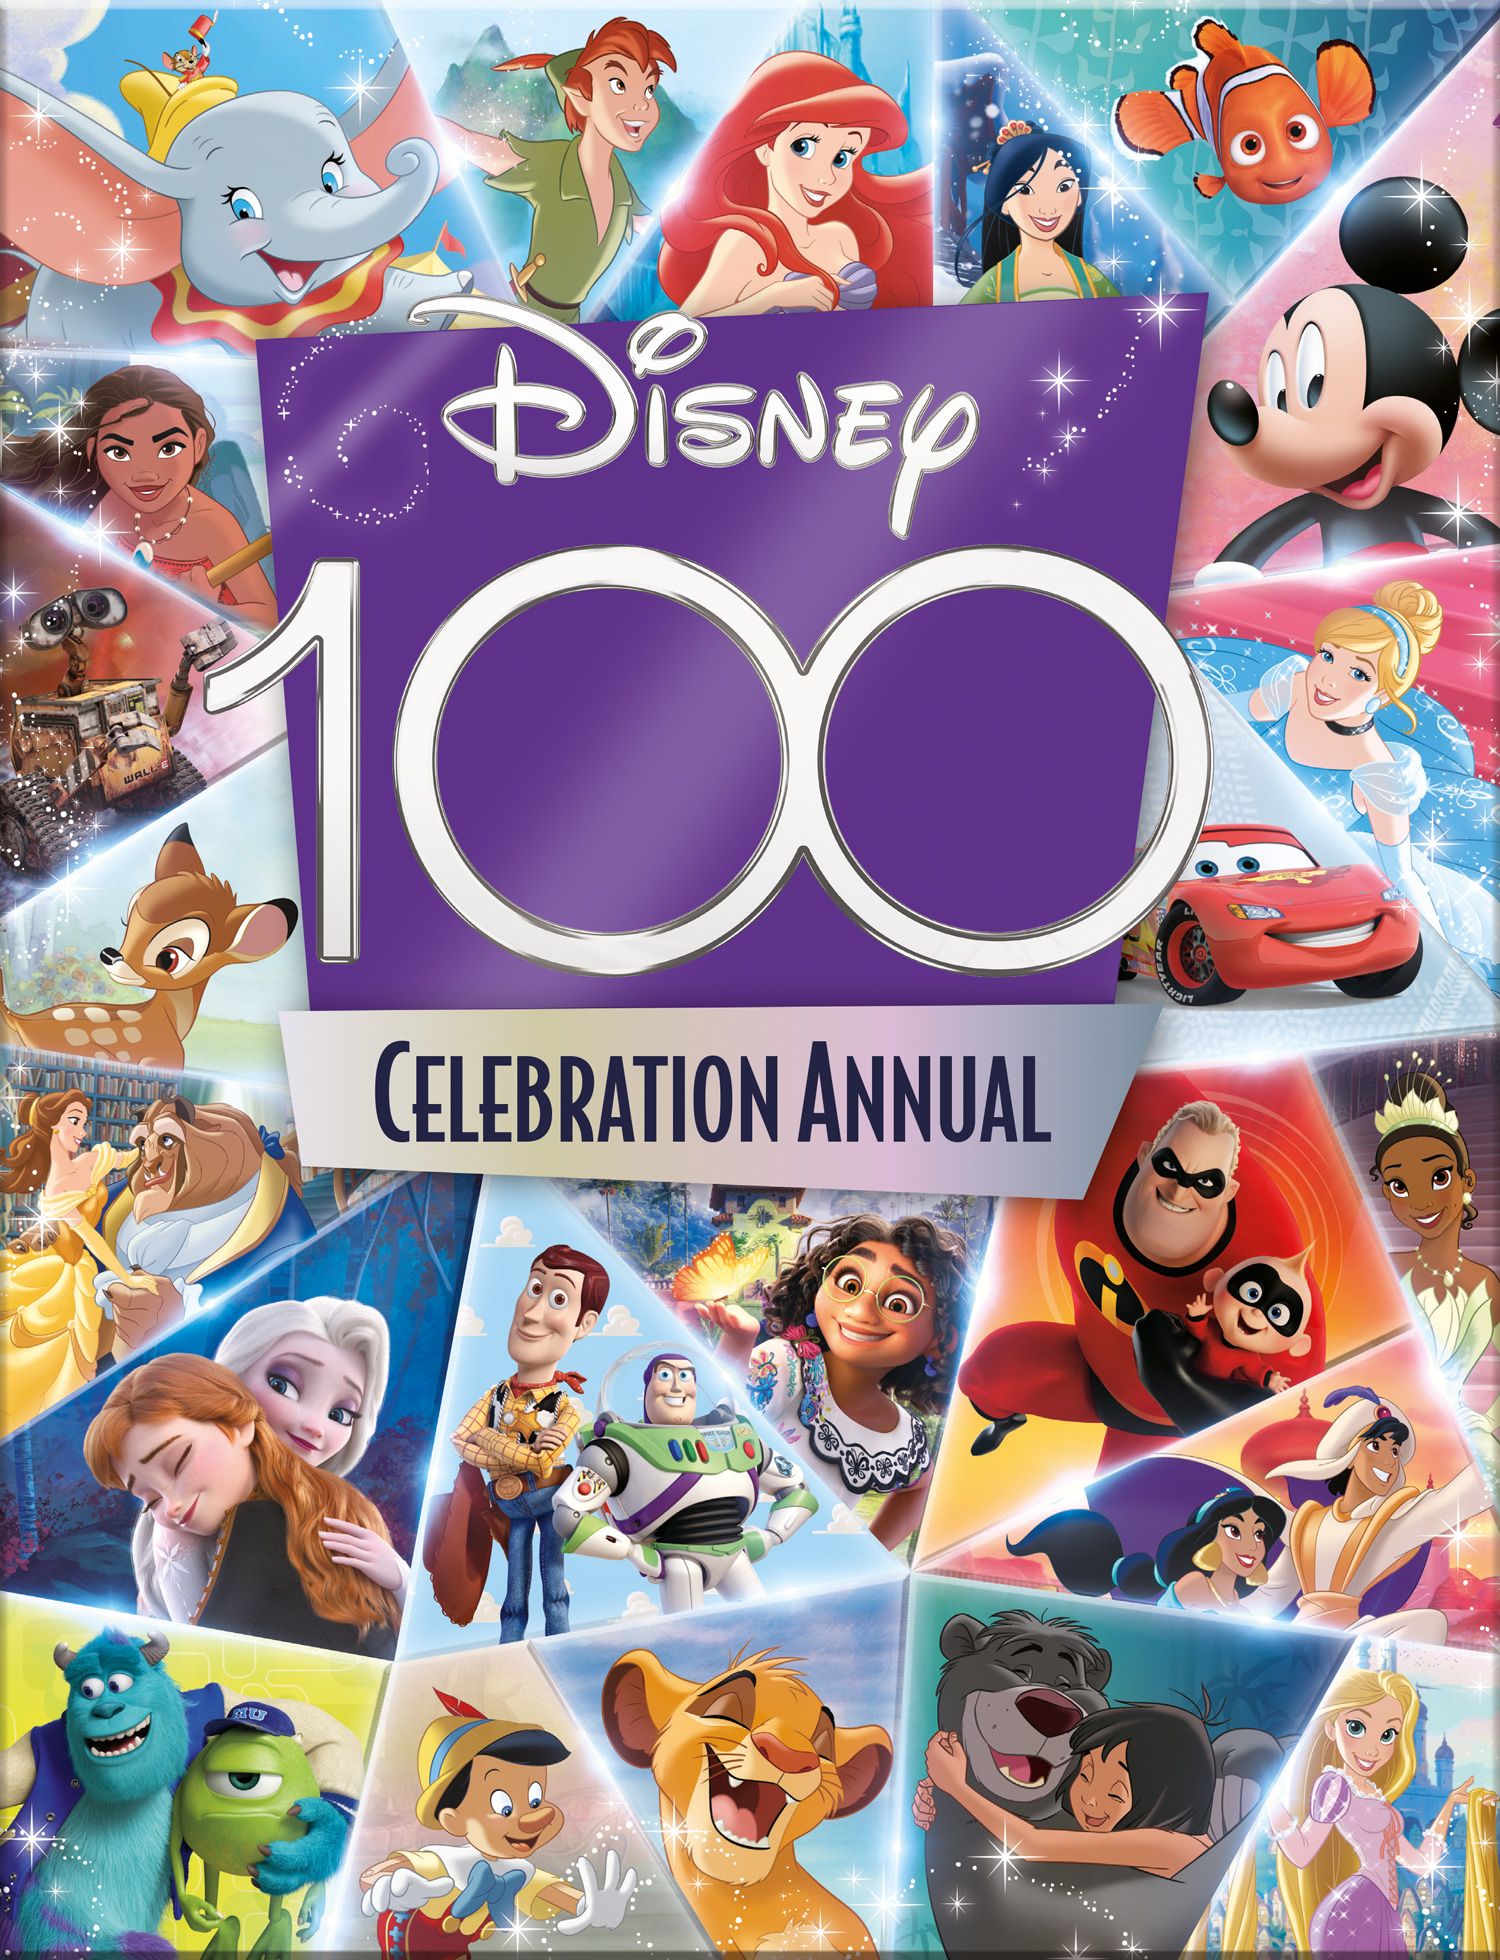 Best Disney 100 gifts and merchandise to celebrate 100th anniversary